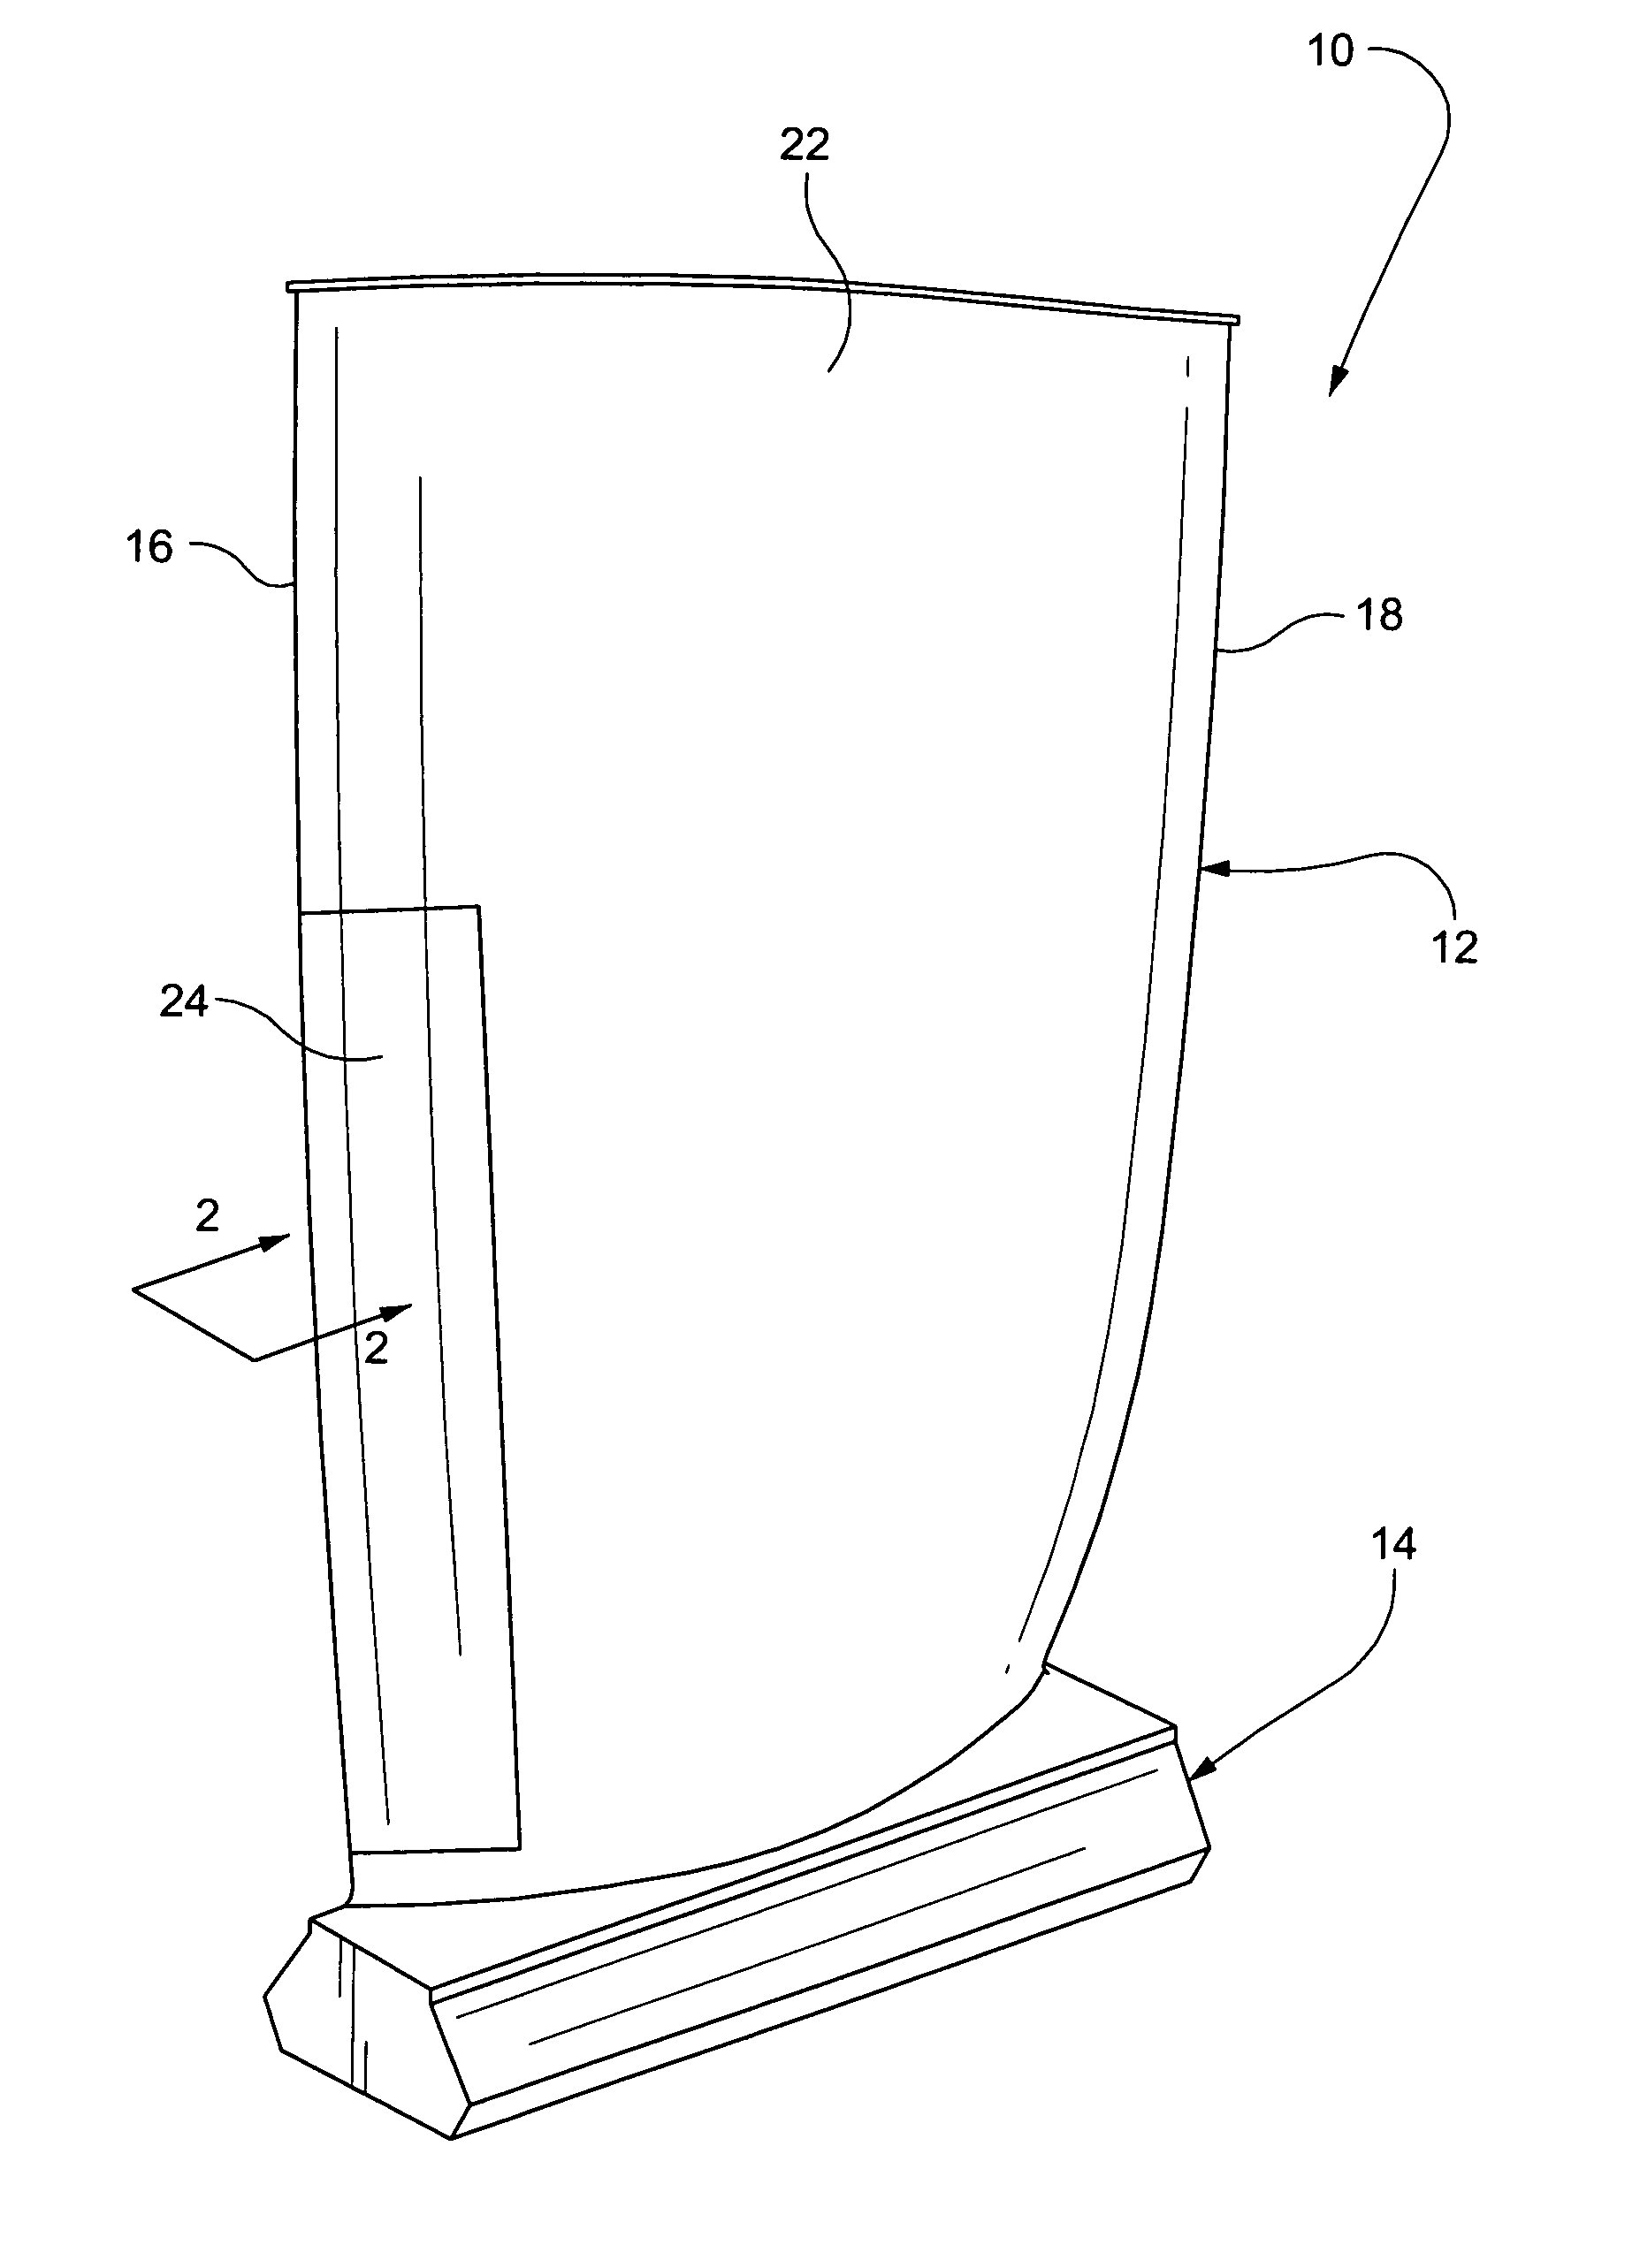 Compressor blade leading edge shim and related method